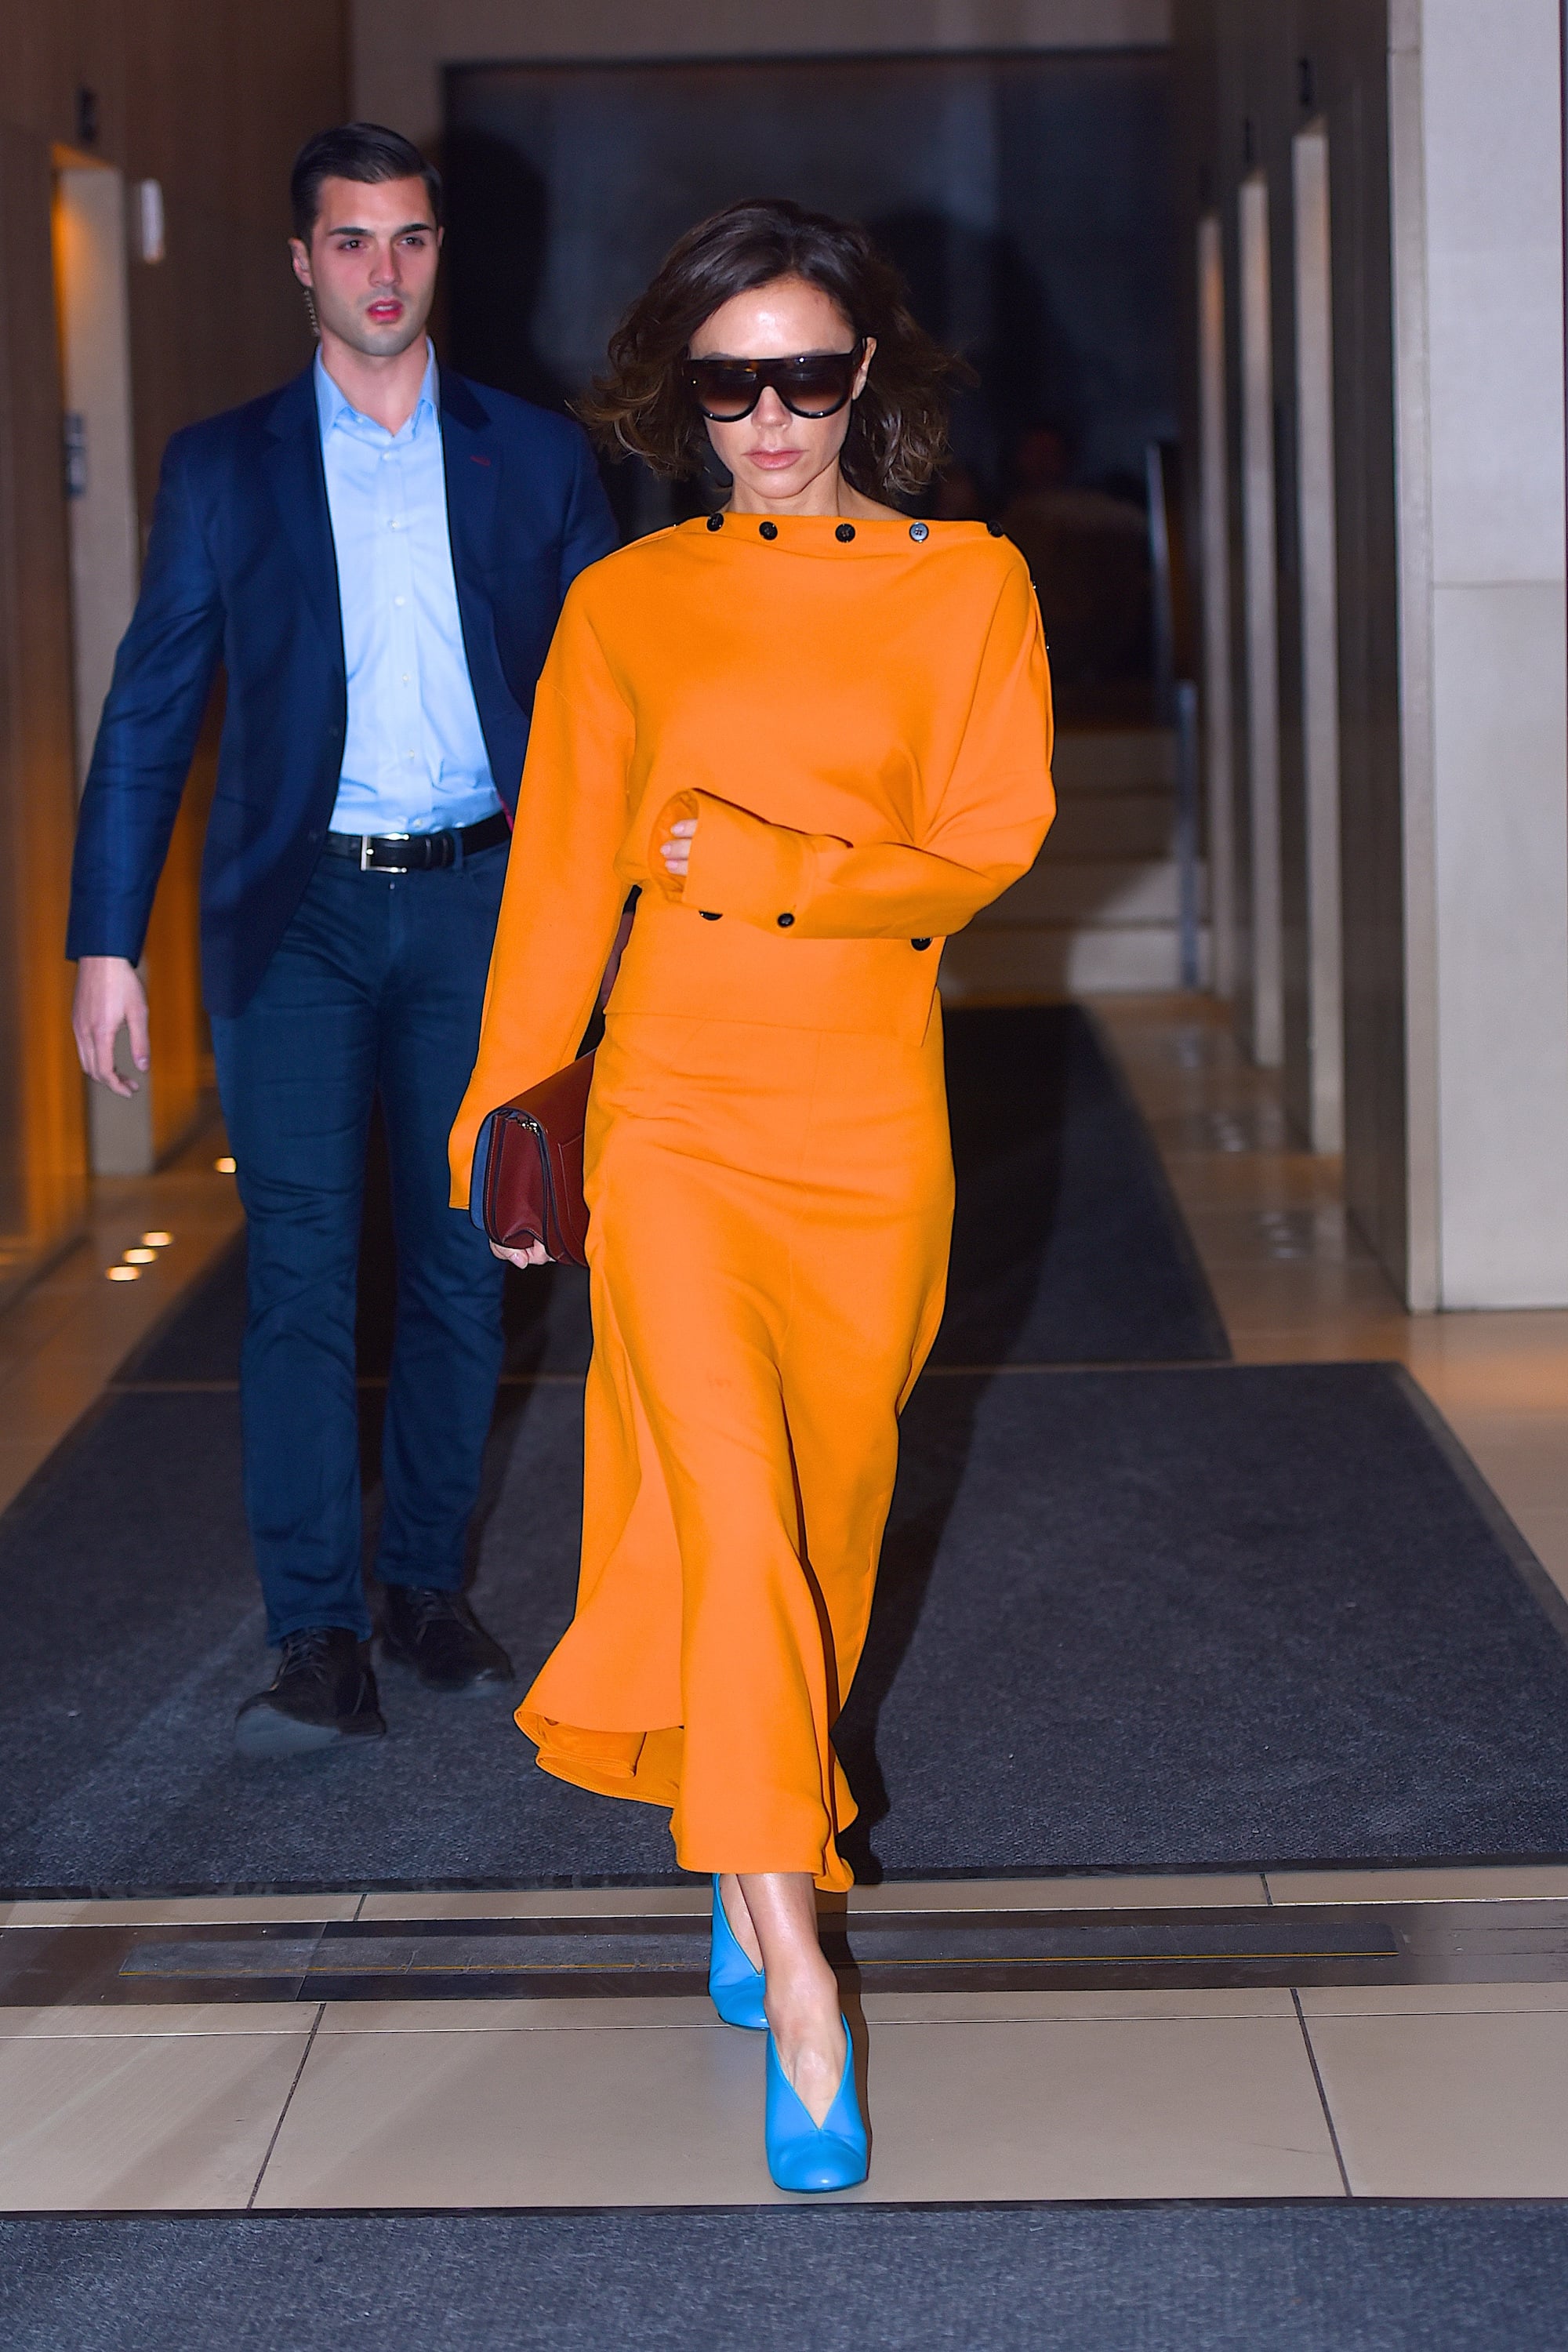 barbermaskine Plaske Mig Pairing a Bright Orange Dress With Blue Pumps | Let Victoria Beckham Serve  as Your Date-Night Outfit Inspiration This Fall | POPSUGAR Fashion Photo 10